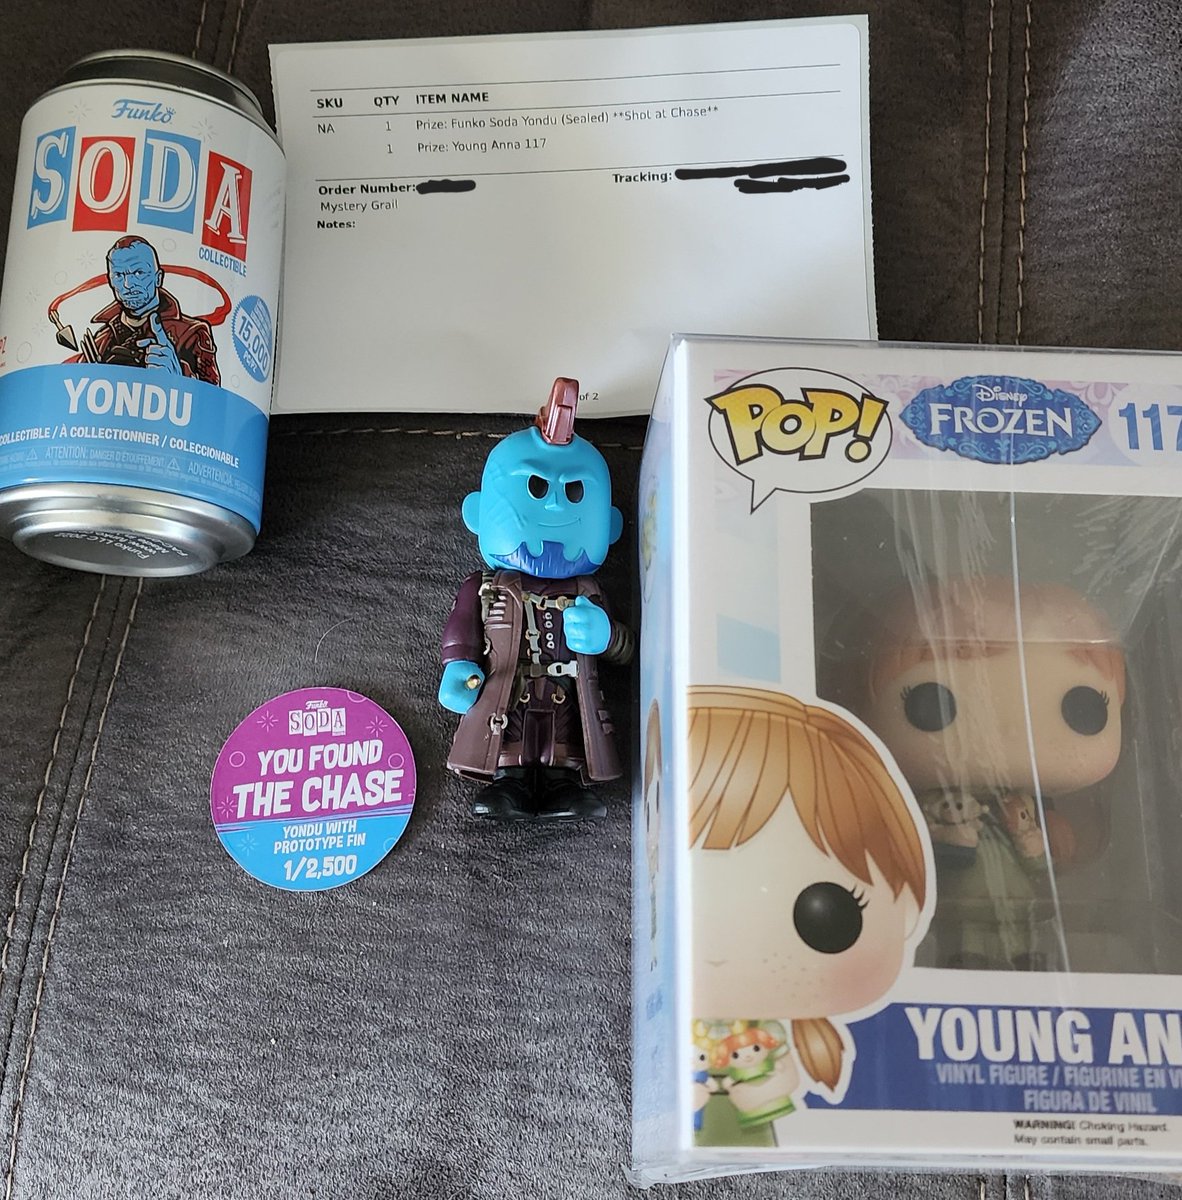 Thanks, @7BucksAPop #MysteryGrail redeemed for these in the prize shop plus some protectors. Definitely made a hard week better! My daughter will love her Frozen Funko btw.